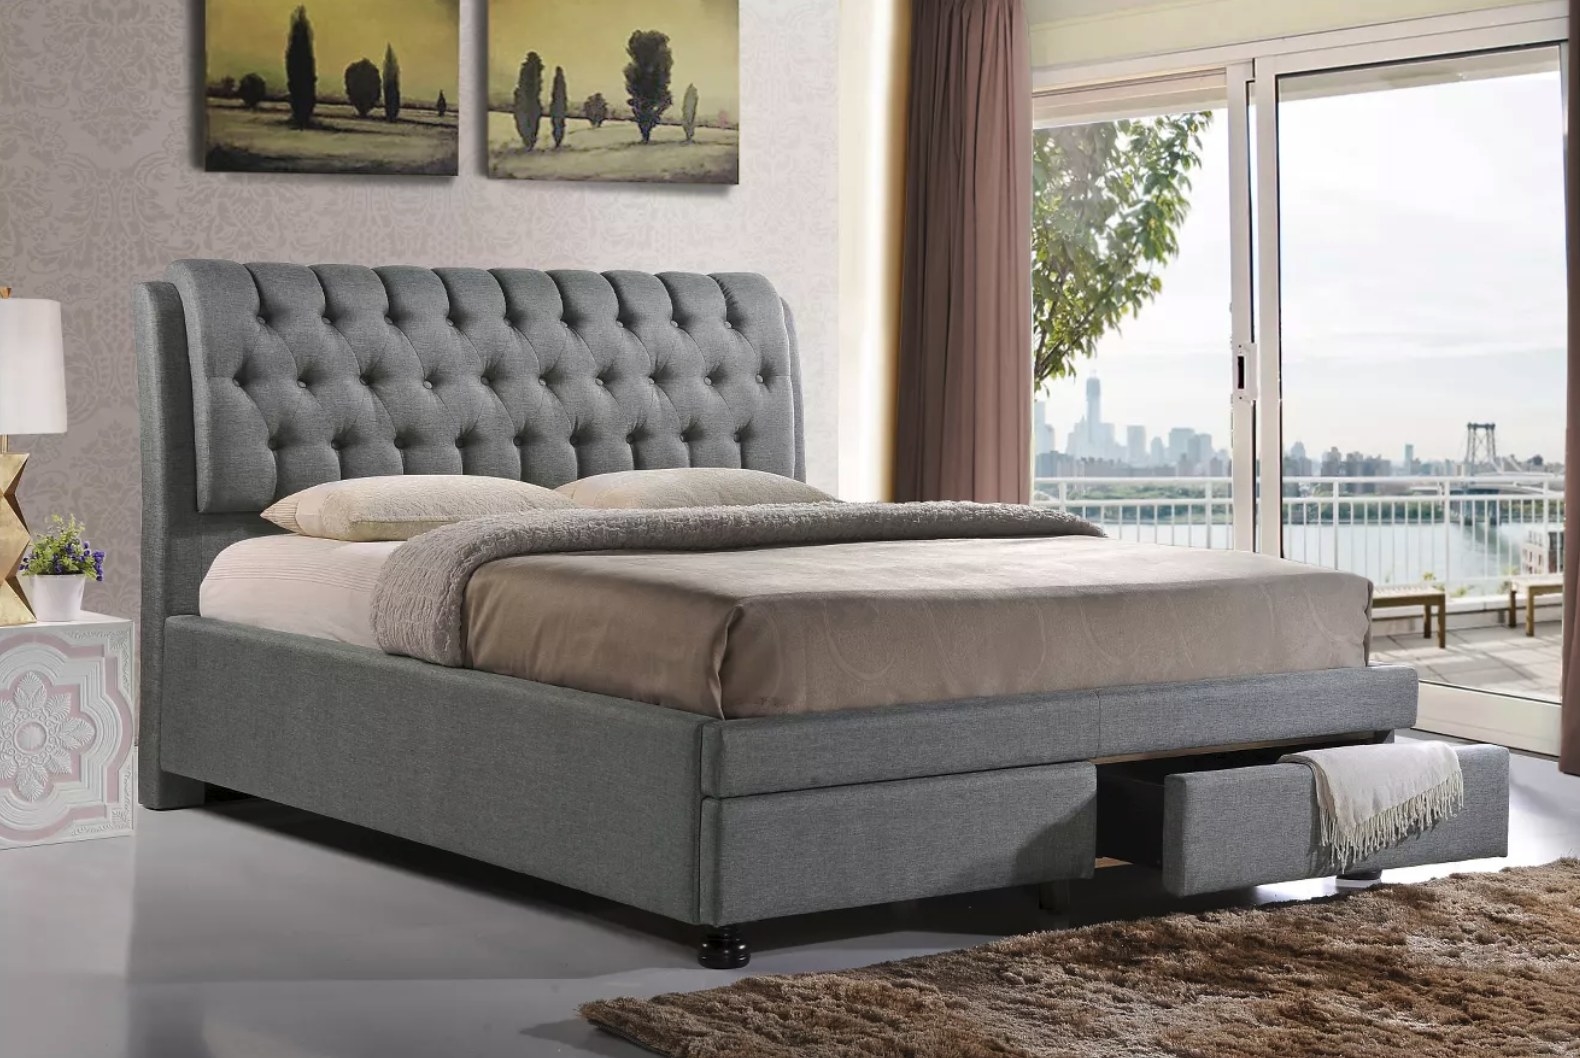 A gray bed frame with a tufted headboard and two drawers at the foot.